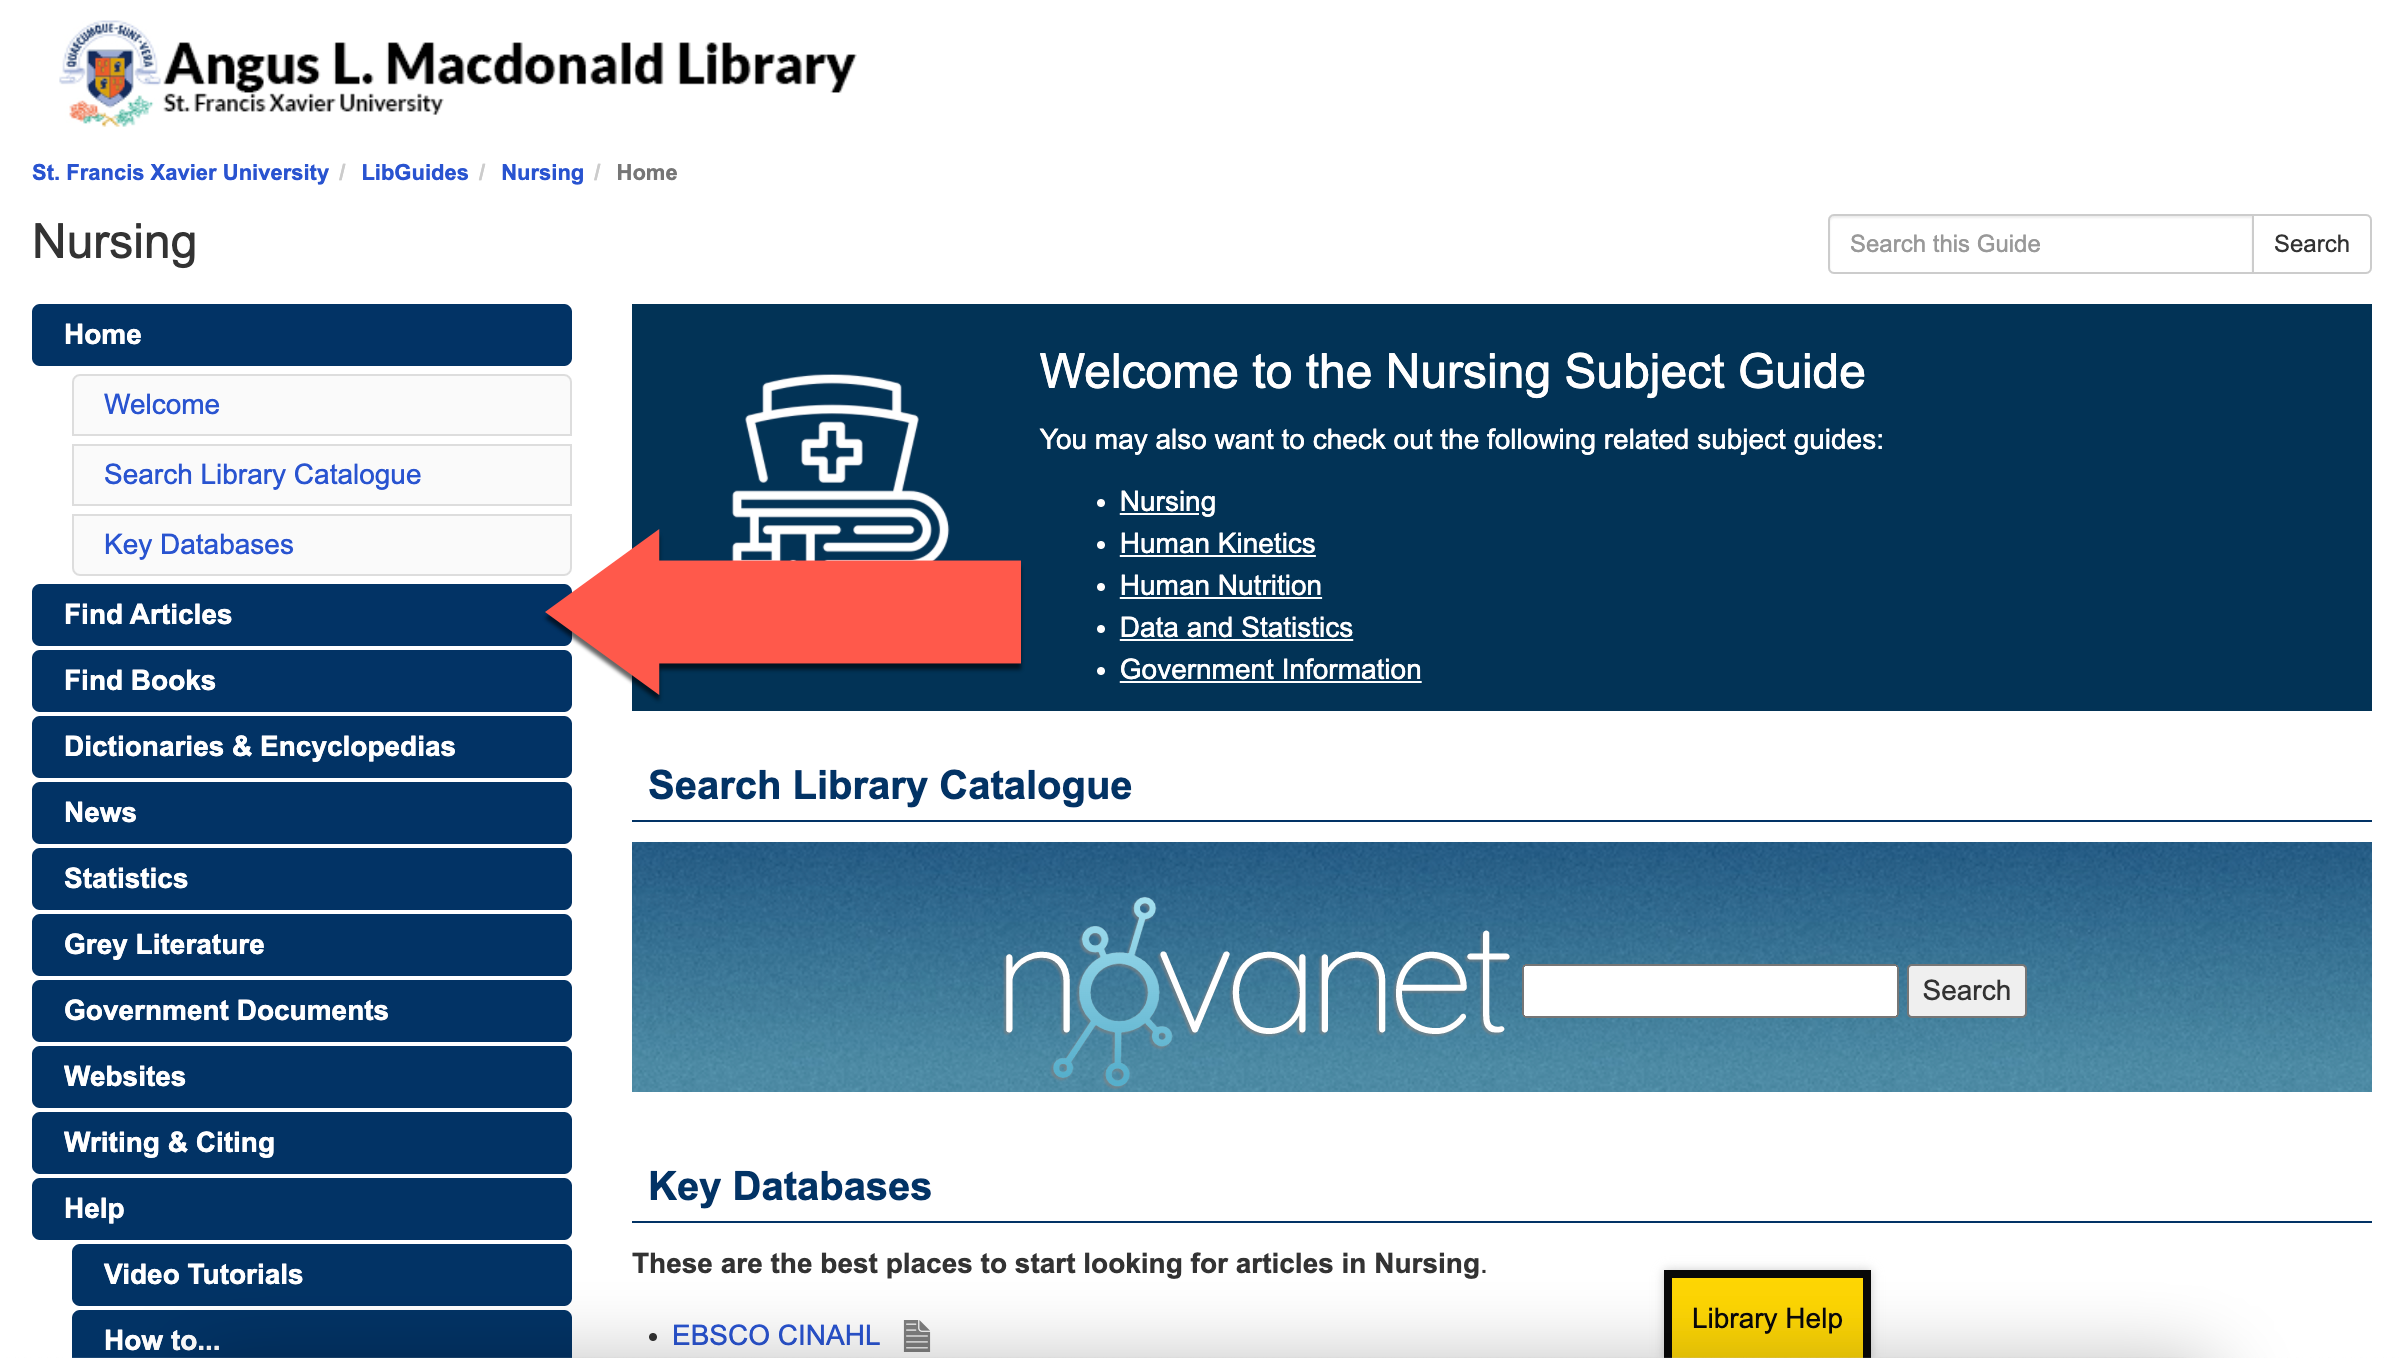 Screenshot of the Nursing Subject Guide highlighting the "Find Articles" tab